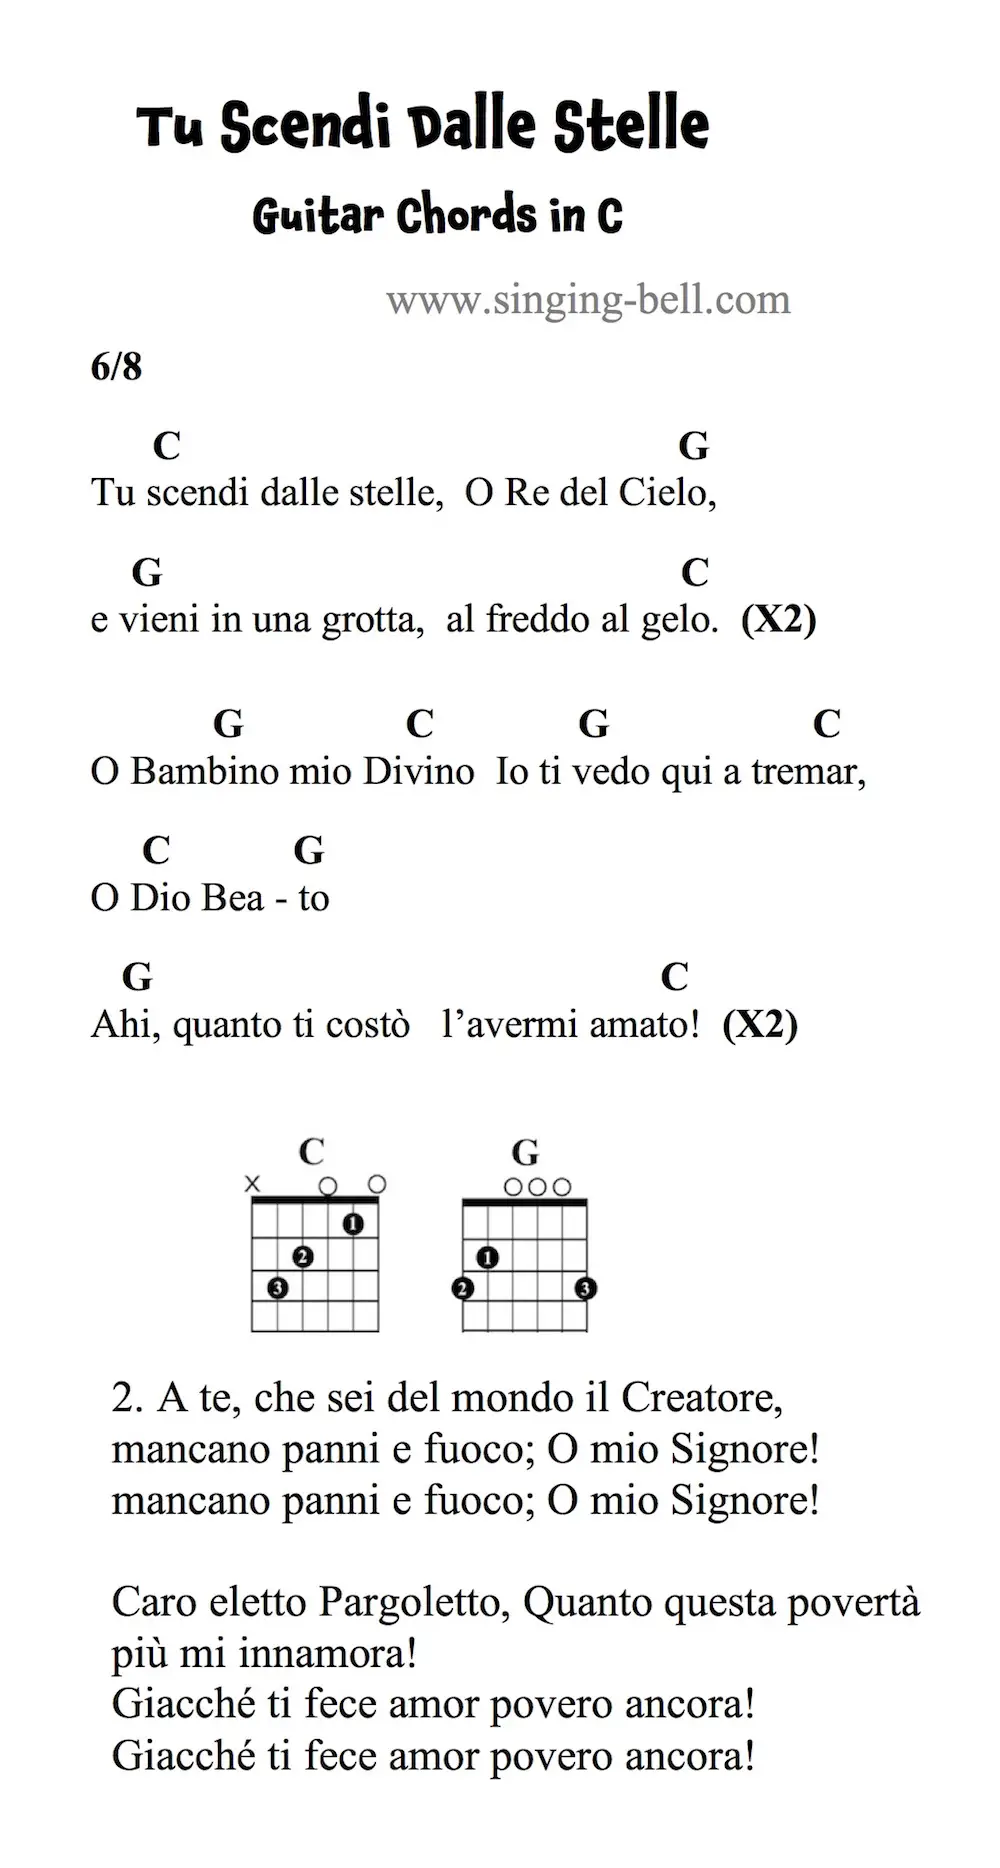 Tu scendi dalle stelle guitar chords and tabs in C.